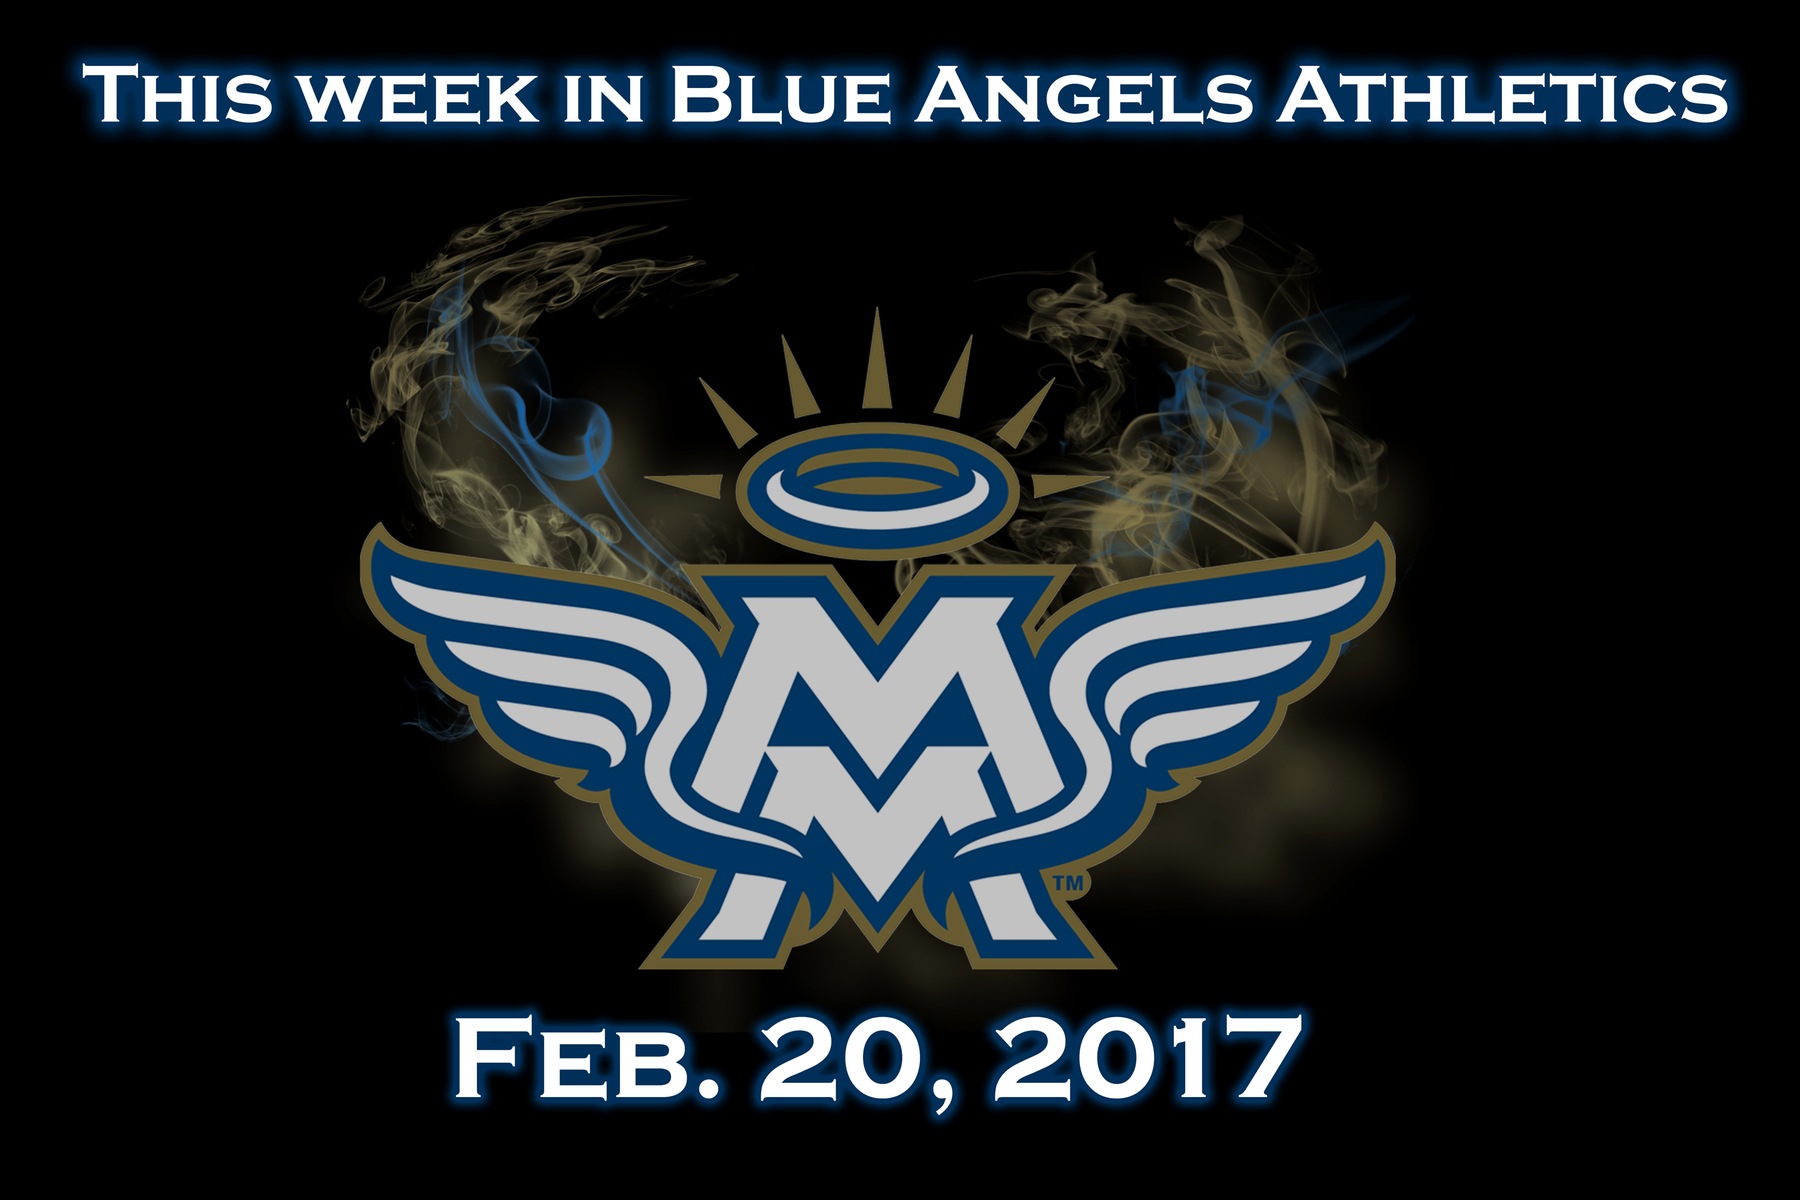 Blue Angels Weekly Preview: 02-20-17